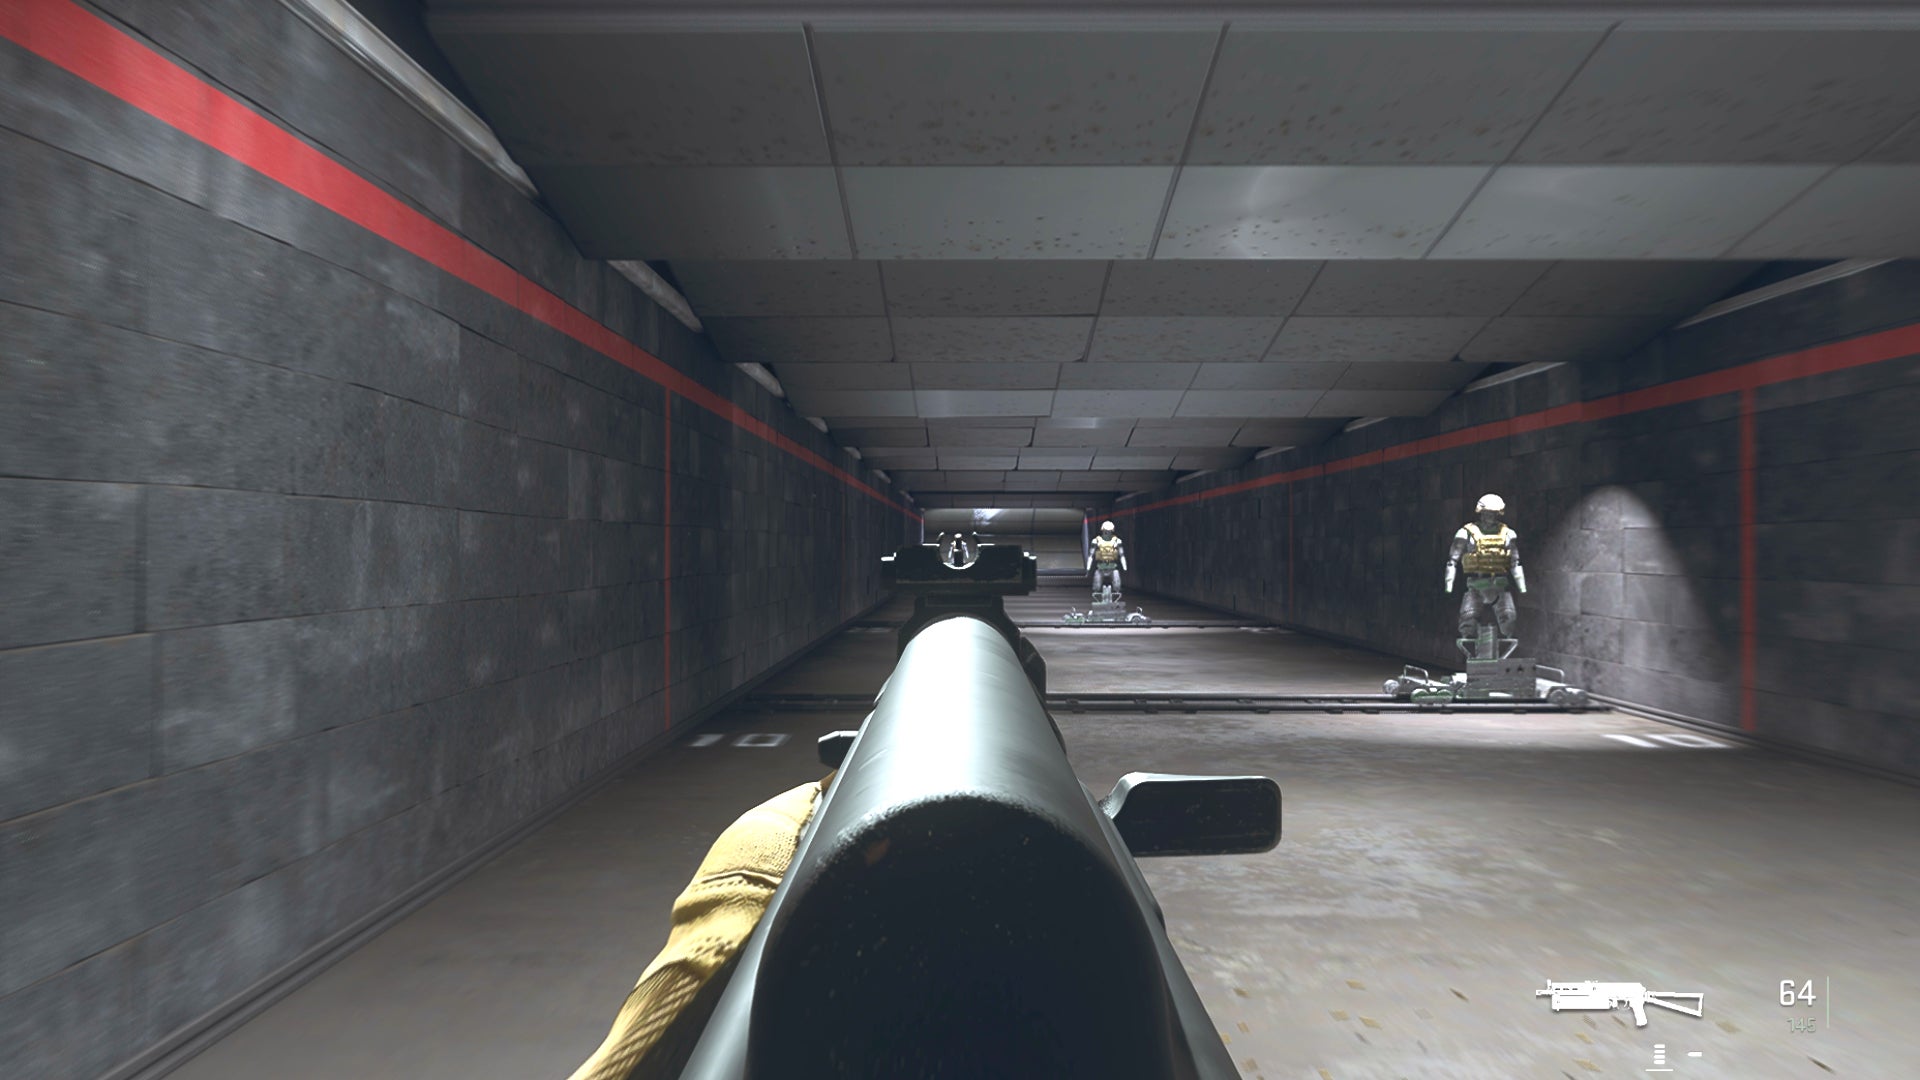 The player in Warzone 2.0 aims at a training dummy with the Minibak ironsights.